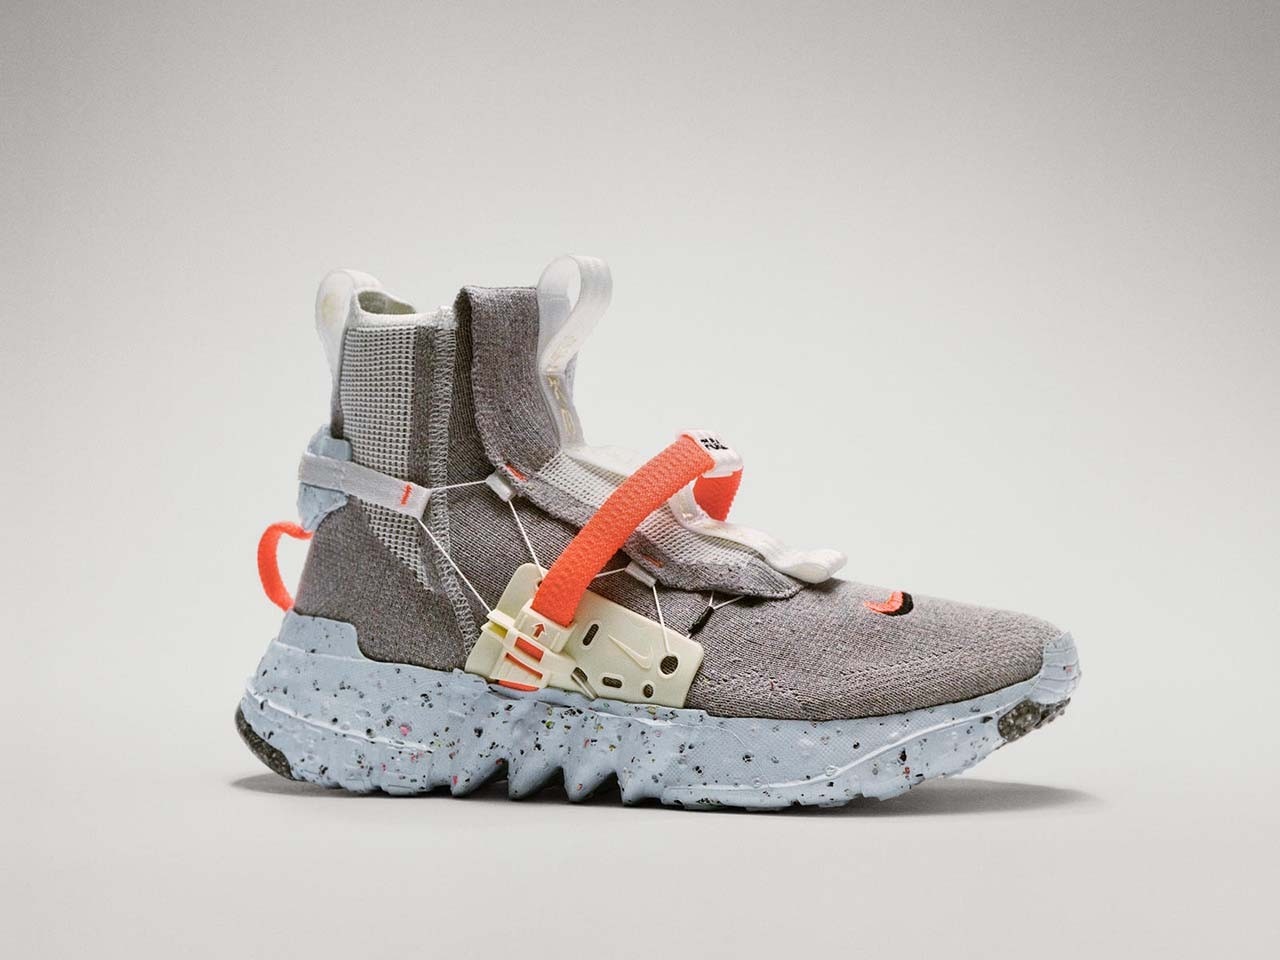 Nike Space Hippie, a first step towards 